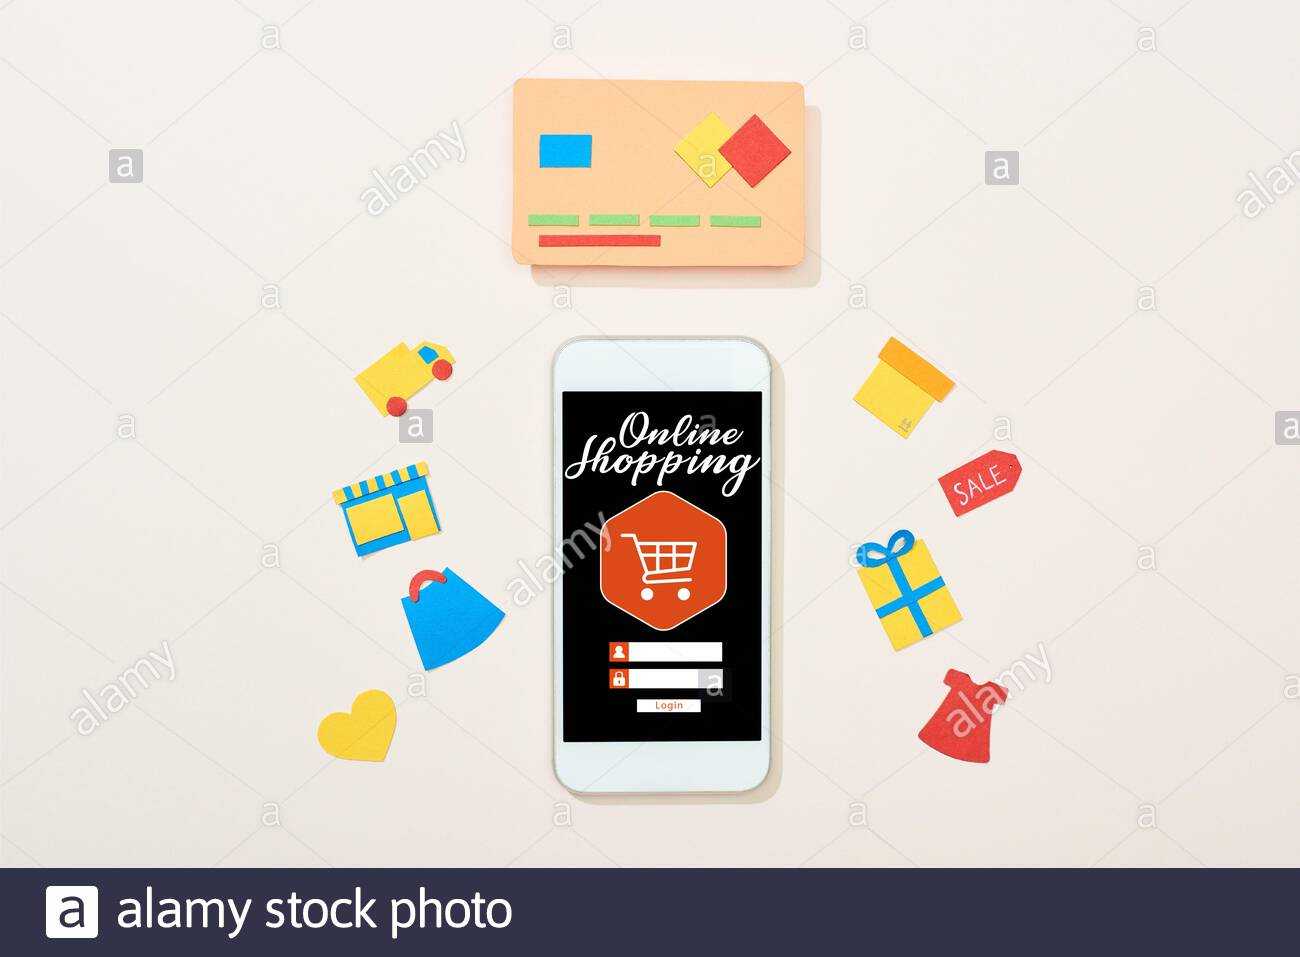 Top View Of Credit Card Template Near Icons And Smartphone With Regard To Credit Card Templates For Sale